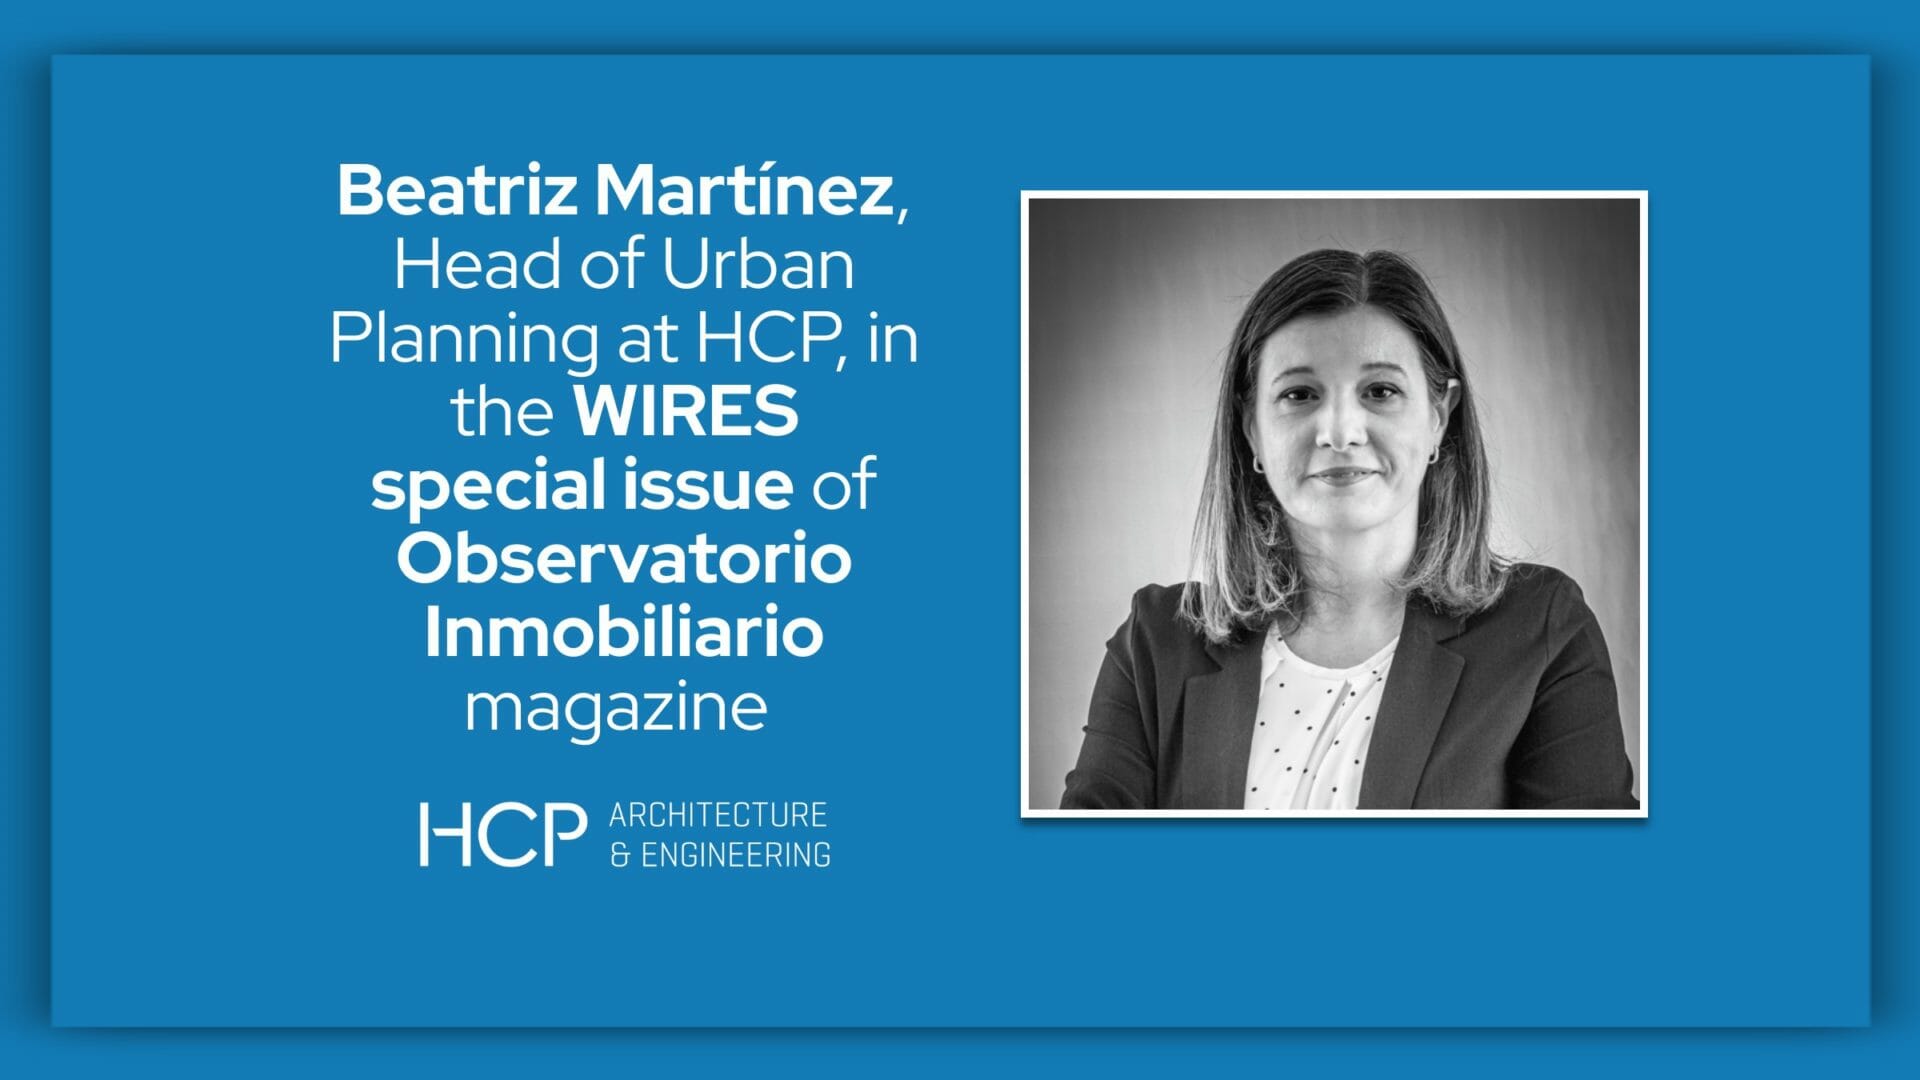 Beatriz Martínez, head of Urban Planning at HCP, in the WIRES special issue